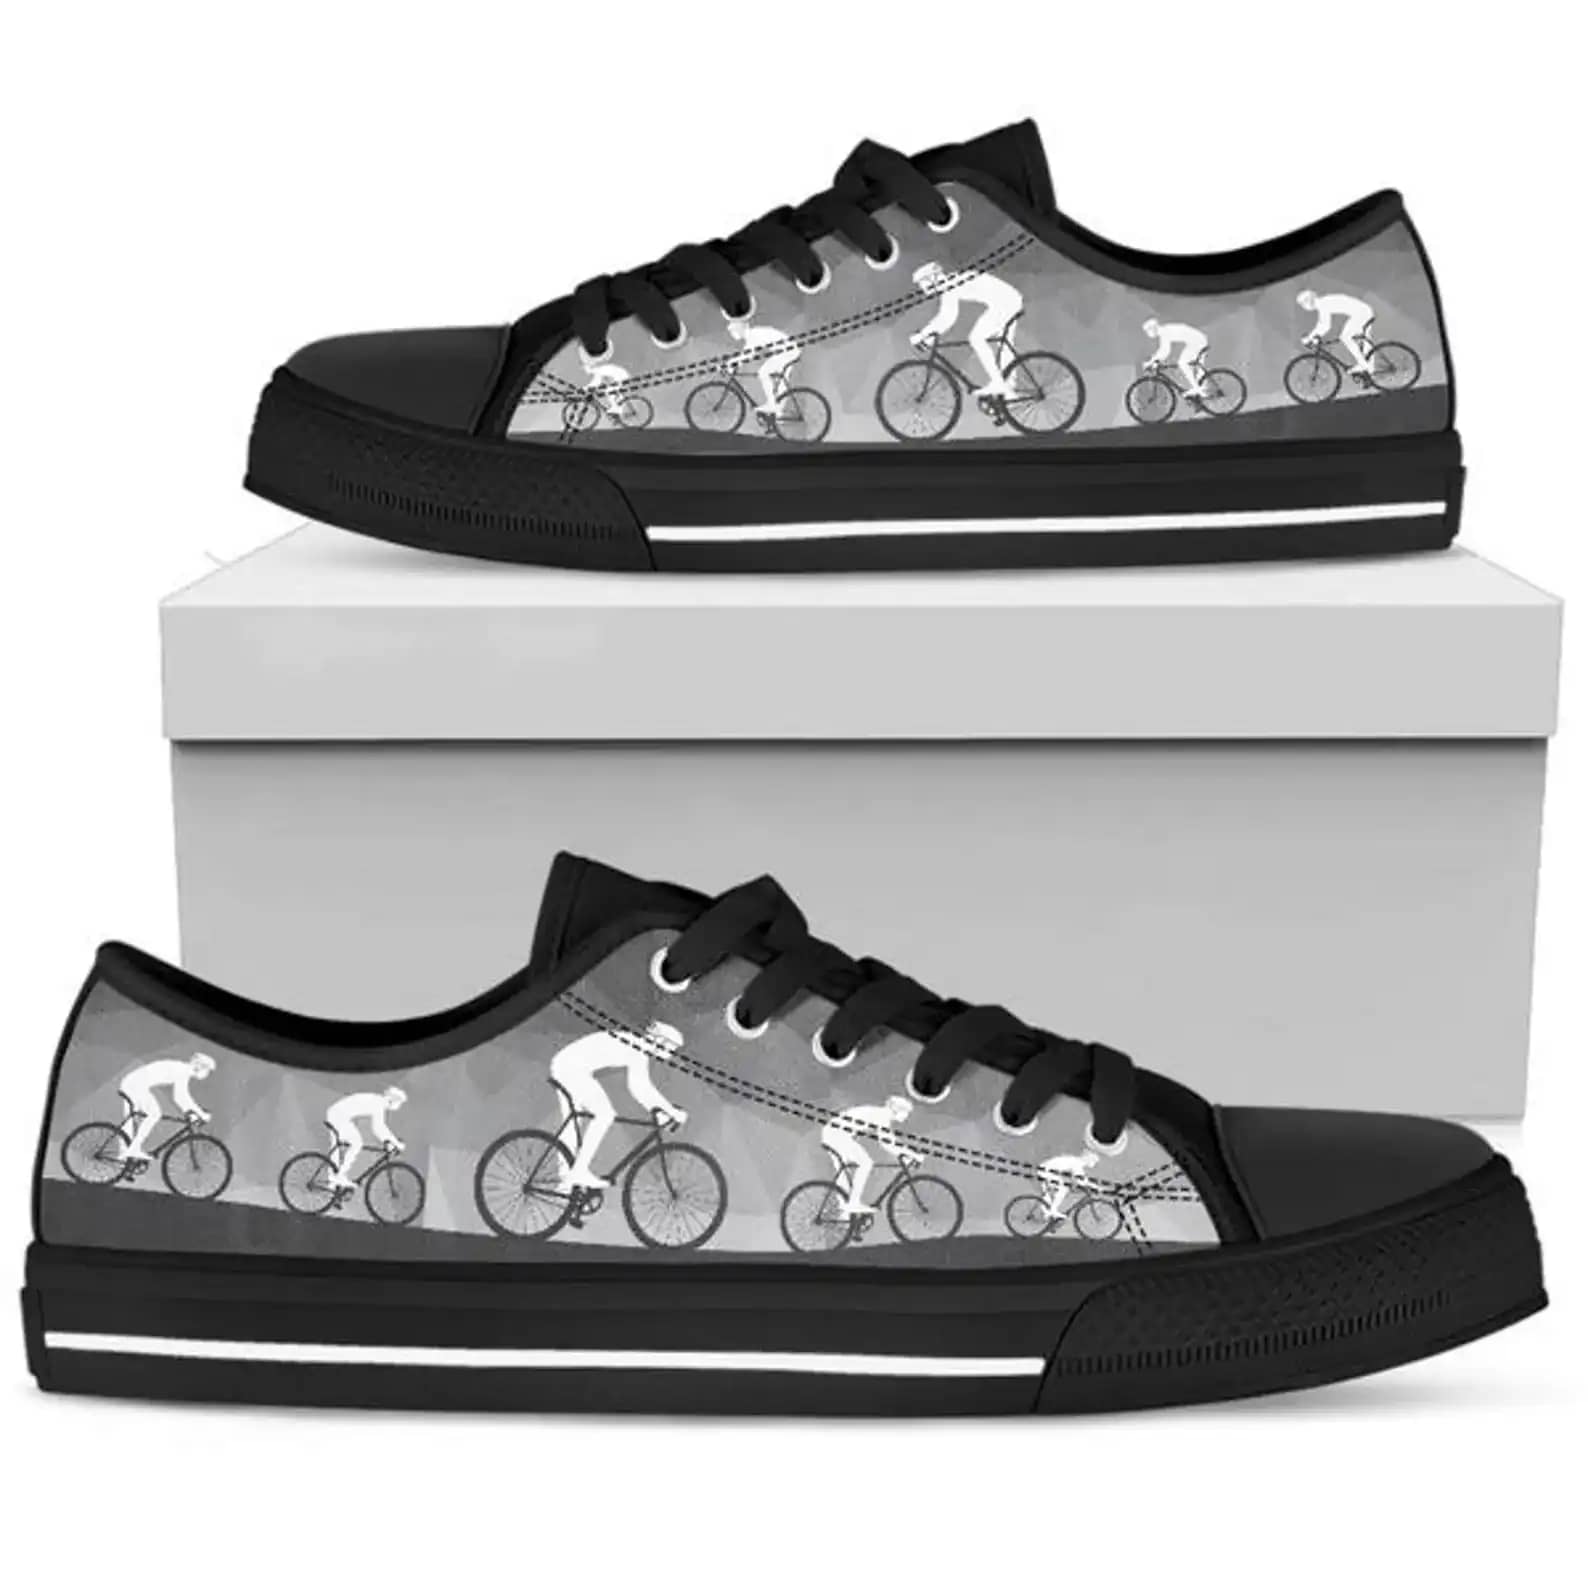 Bicycle Art Athletic Shoes Black And White Low Top Sneakers